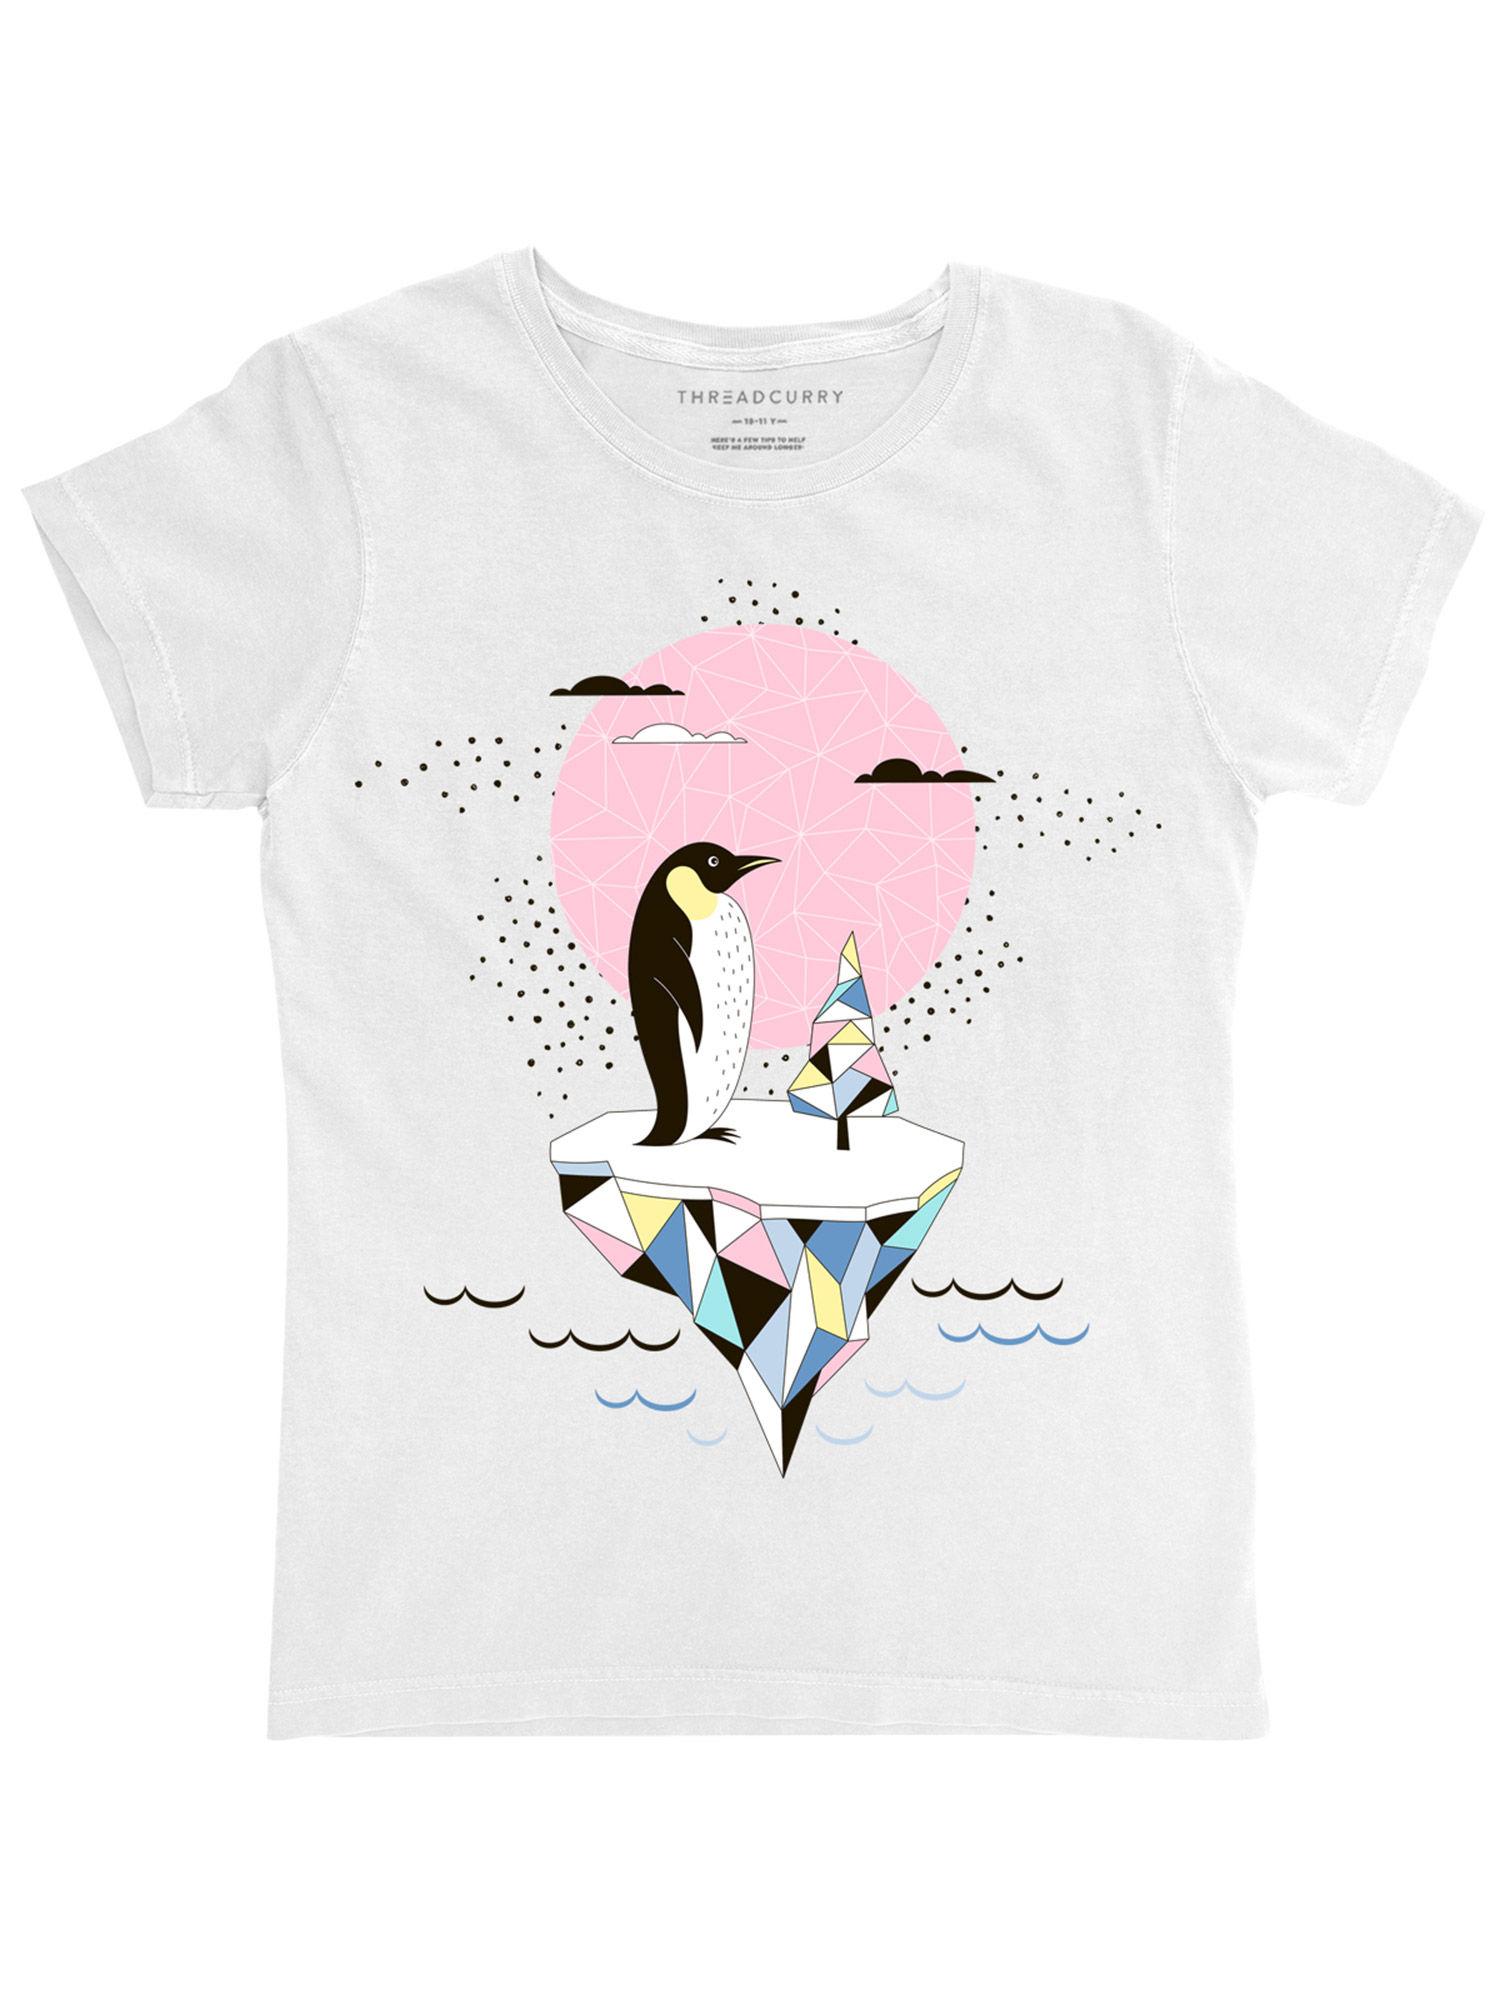 the-lost-penguin-girls-graphic-printed-t-shirt---white